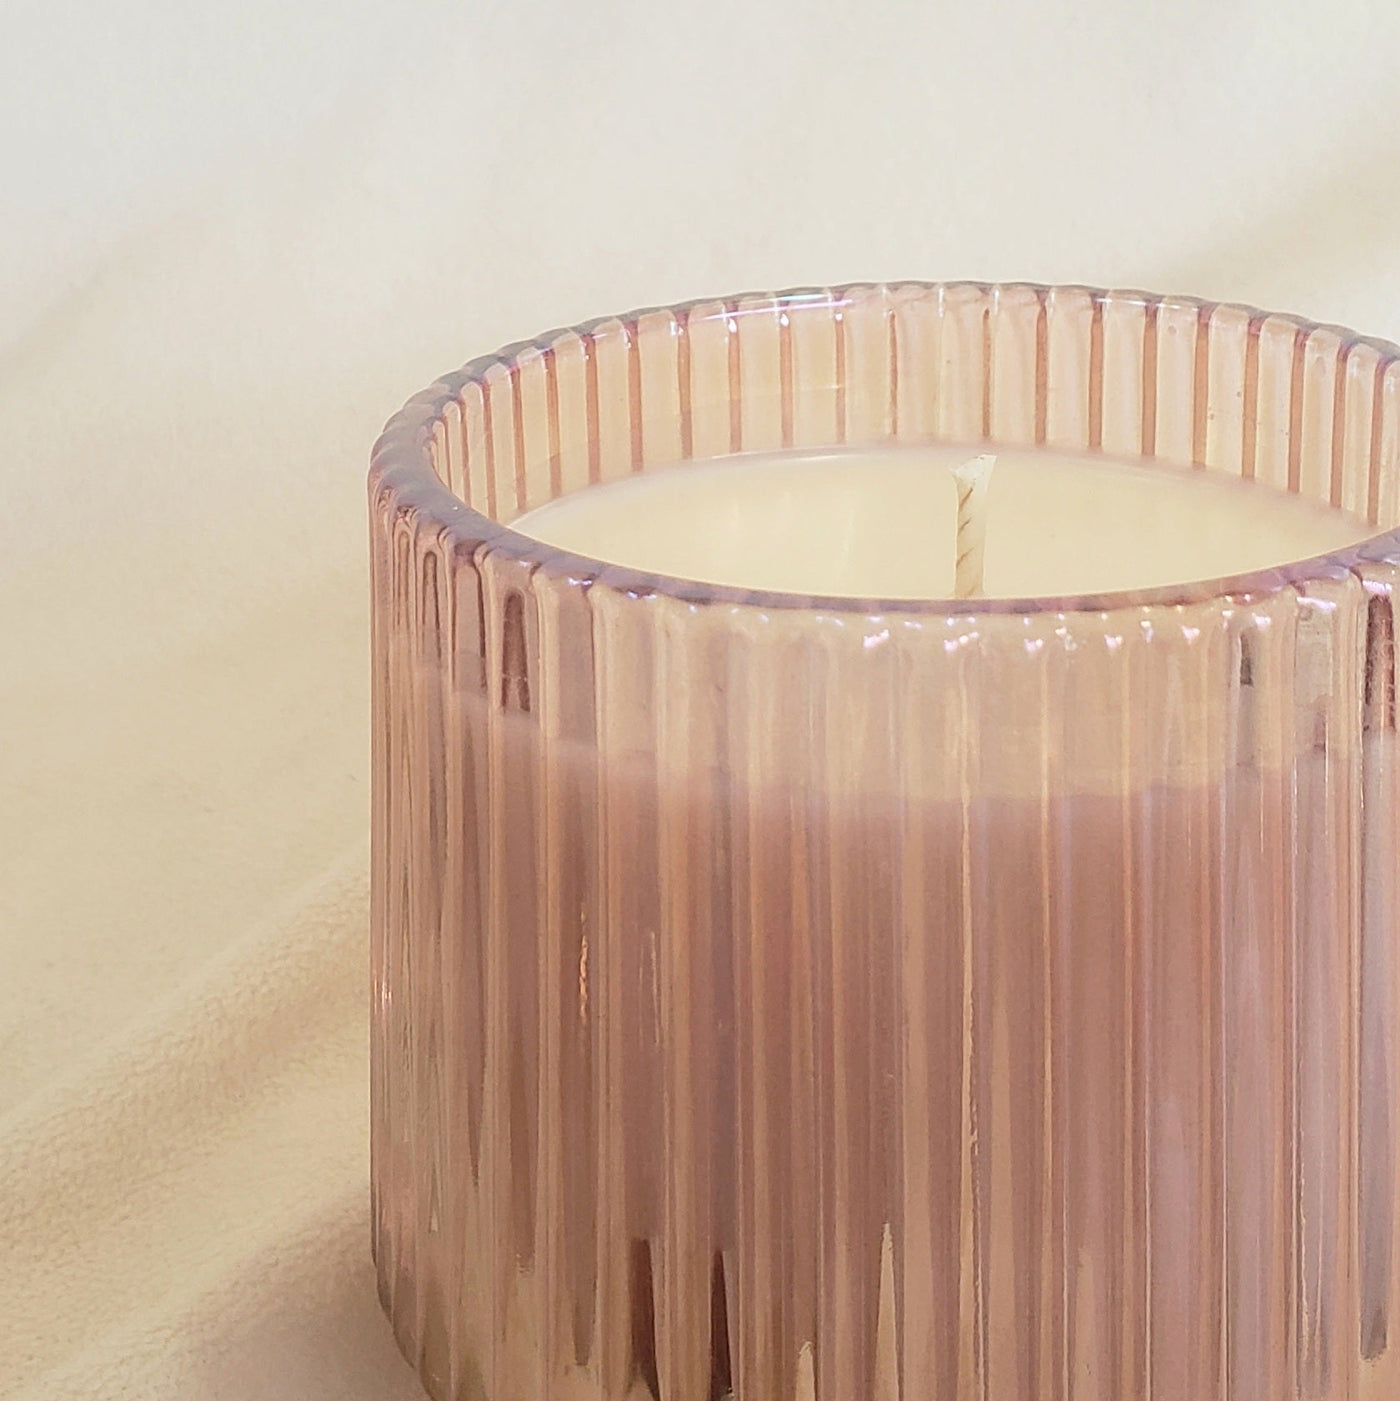 (Fall Scents) Pink Retro Ribbed Candle